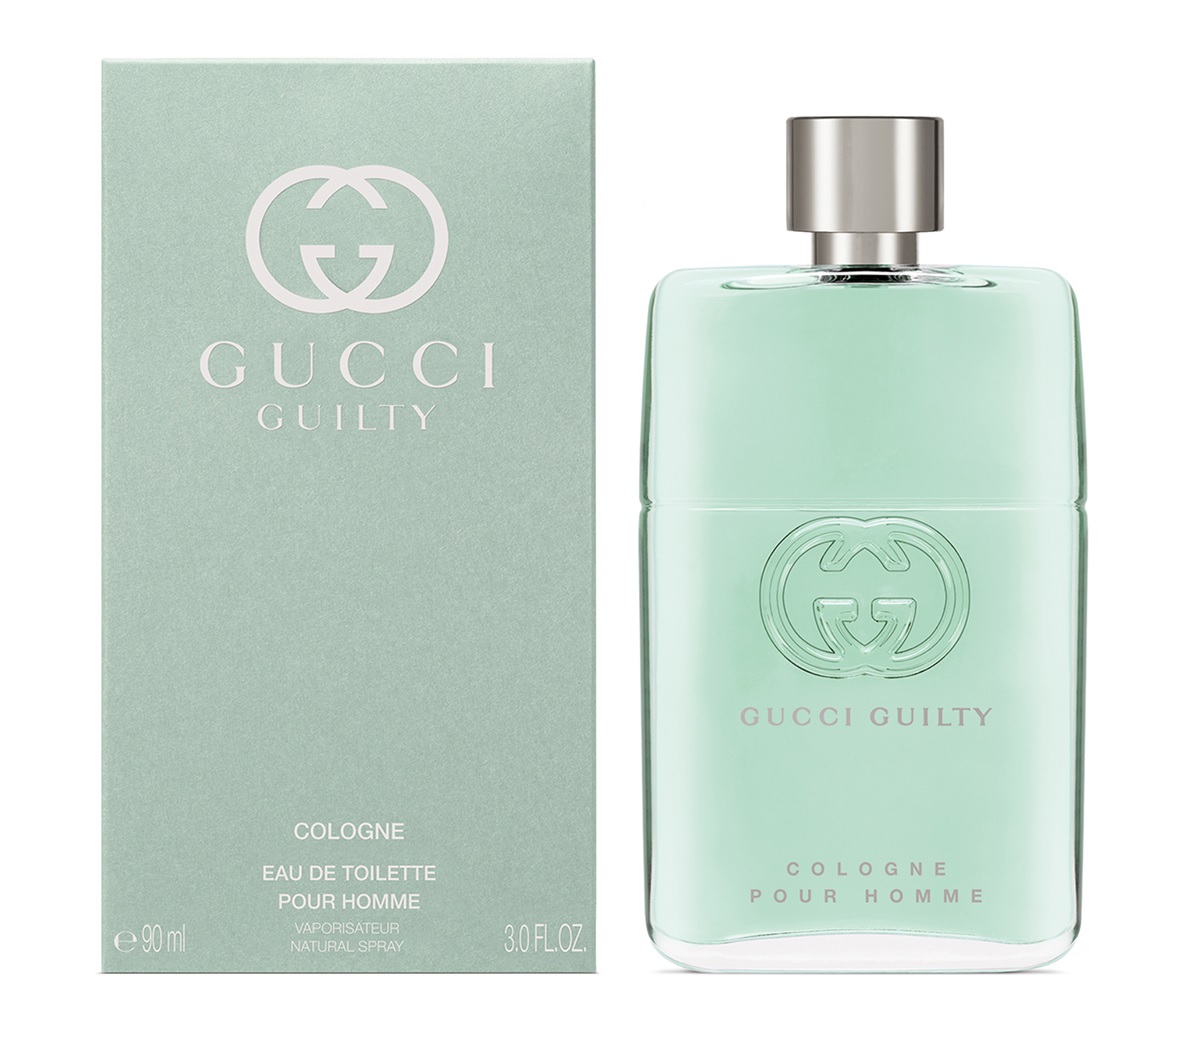 Gucci Guilty Cologne edt